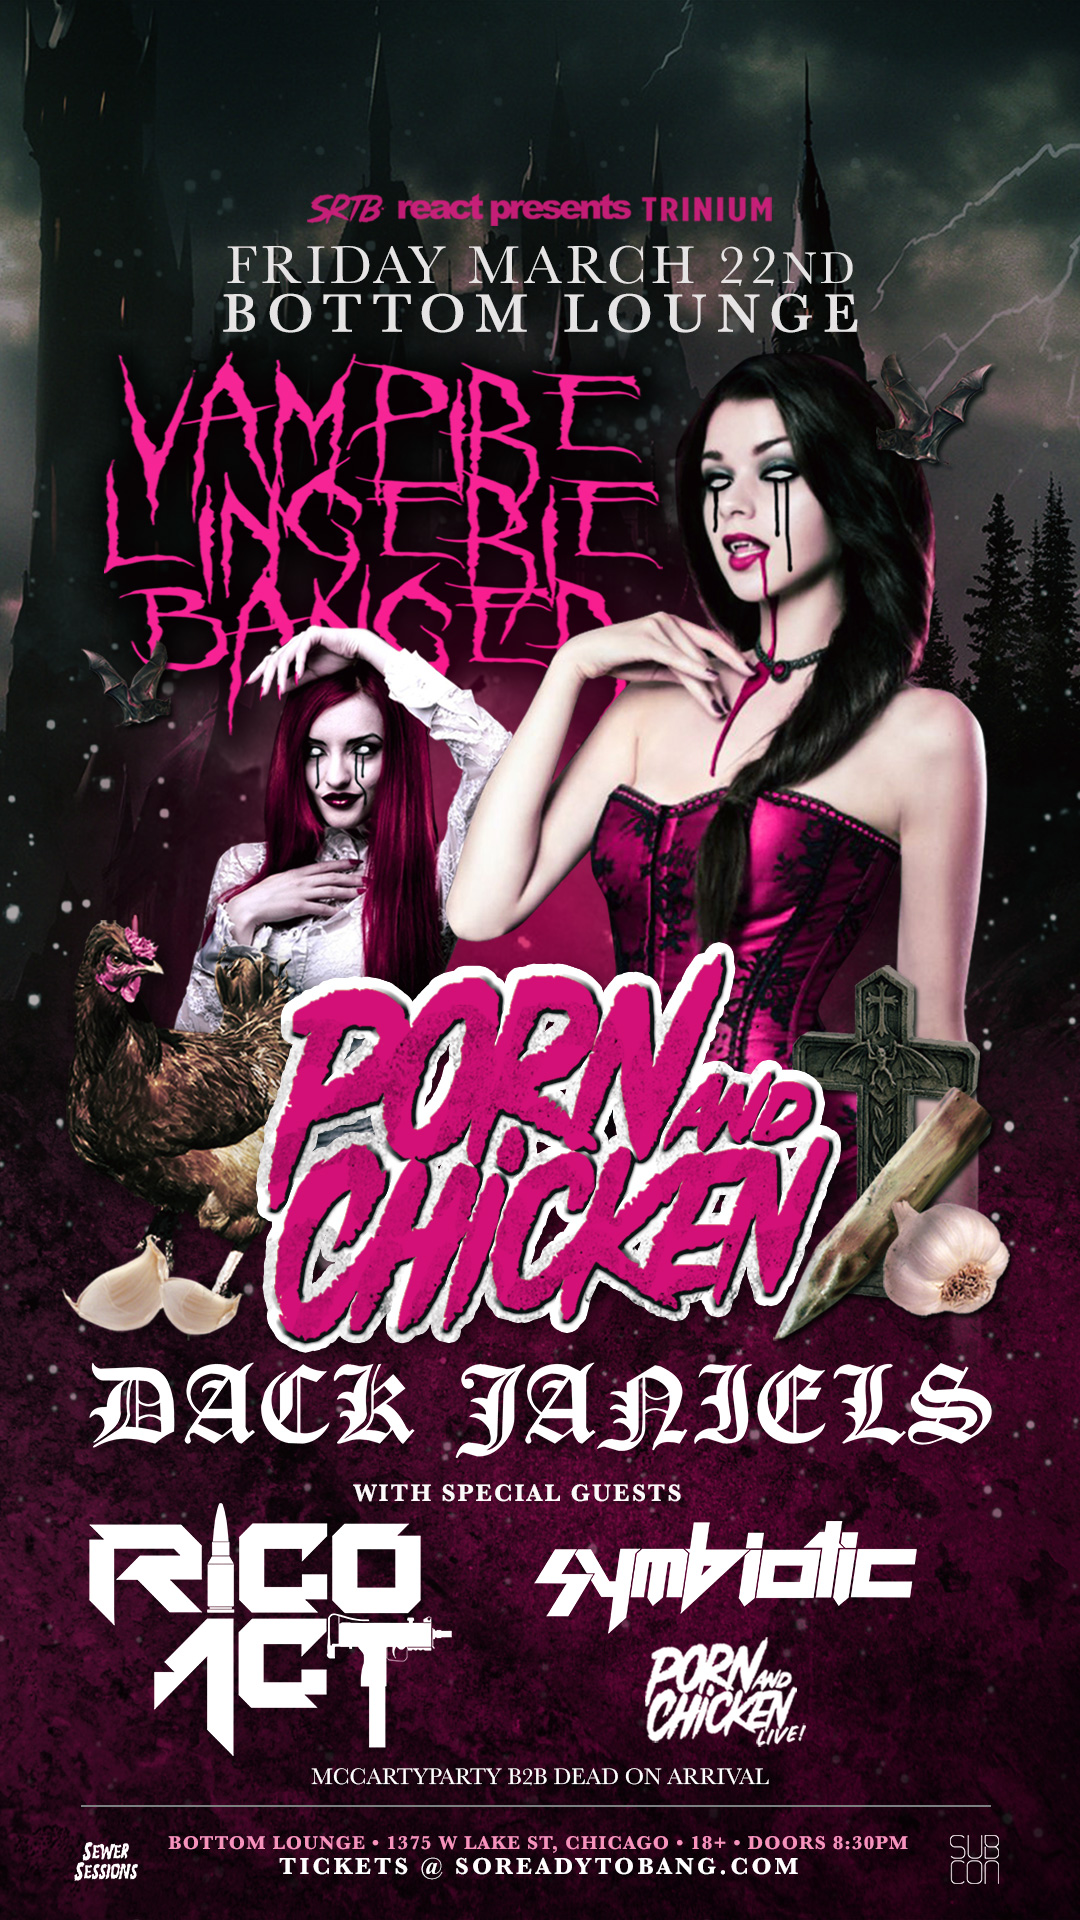 B2b Porn - Buy Tickets to Porn and Chicken: Dack Janiels in Chicago on ...